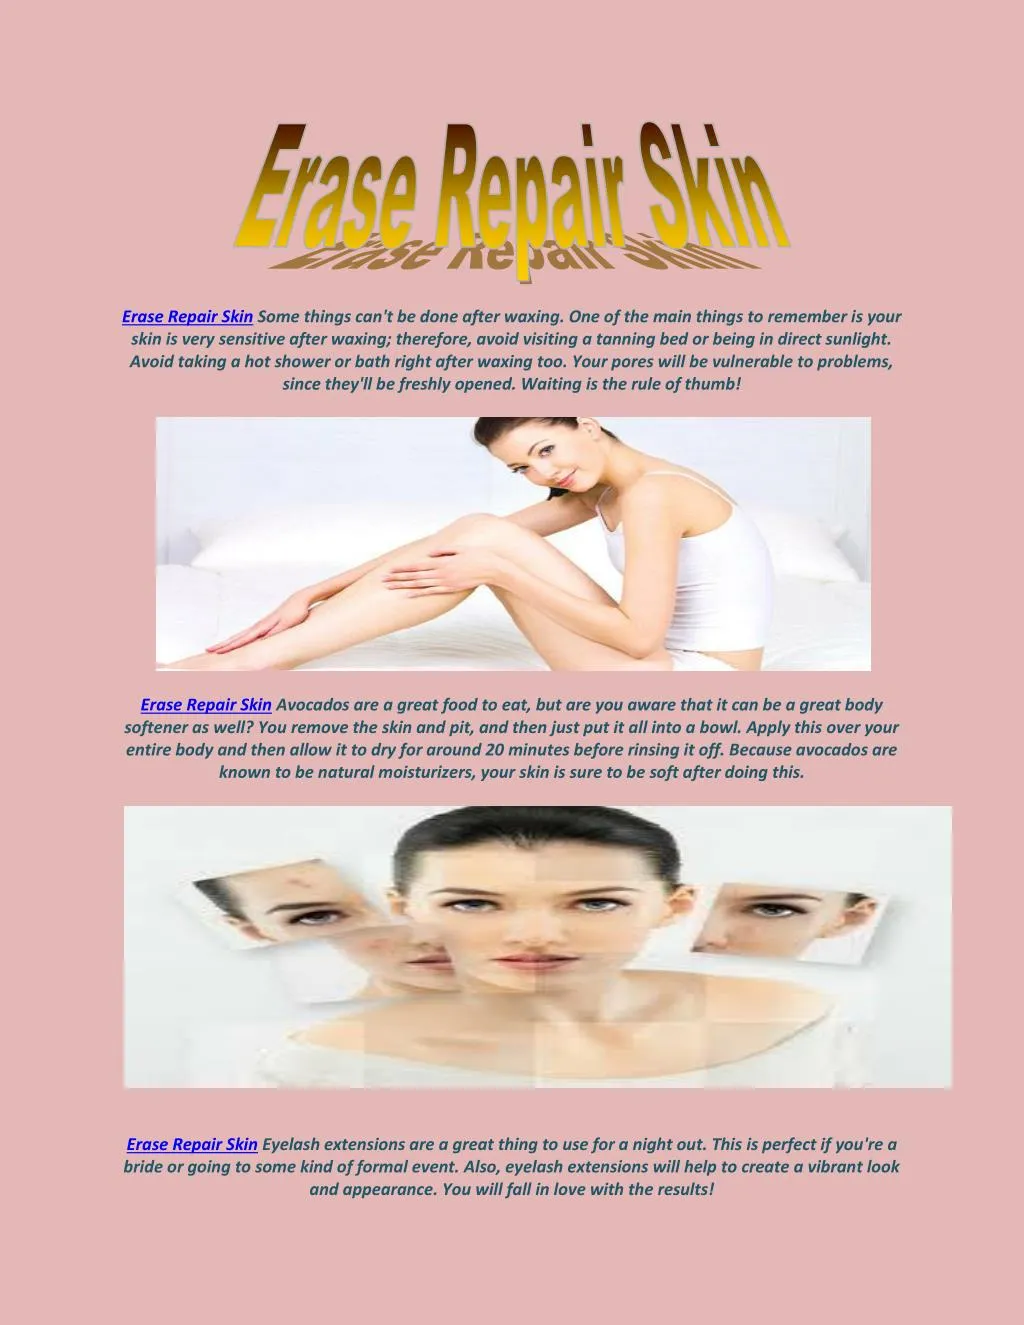 erase repair skin some things can t be done after